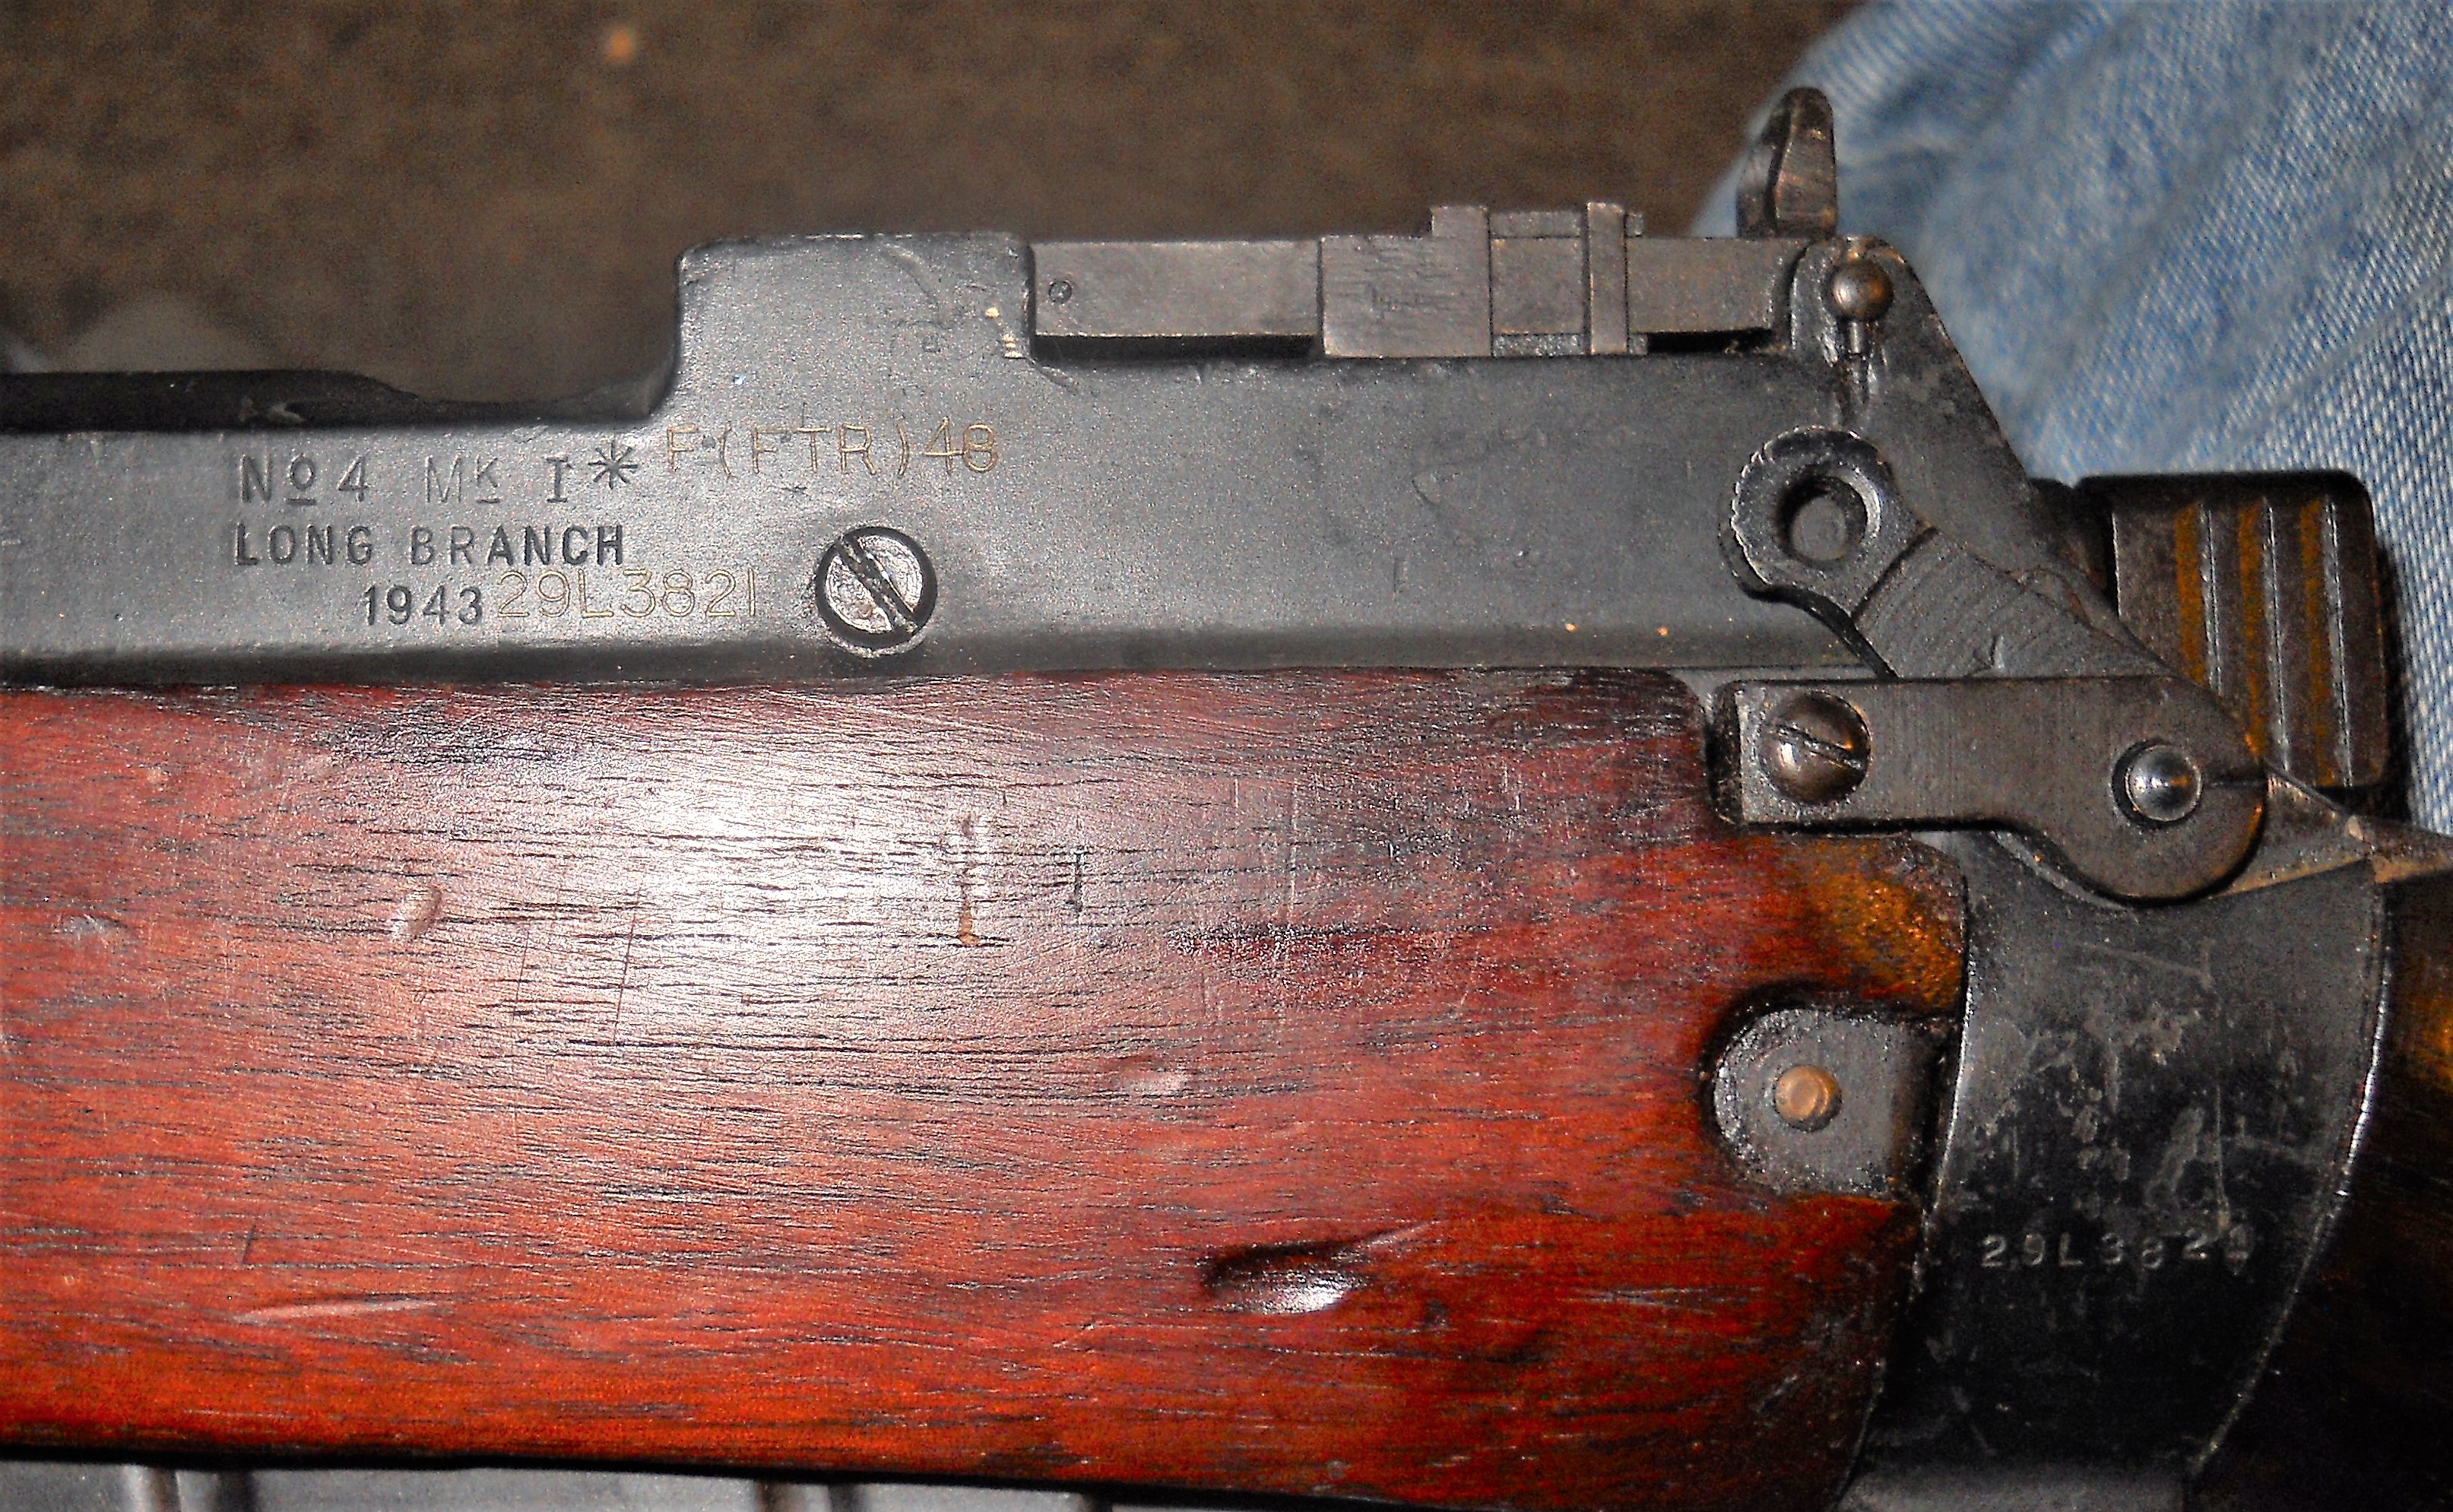 303 British, good for nothing or classic African cartridge?